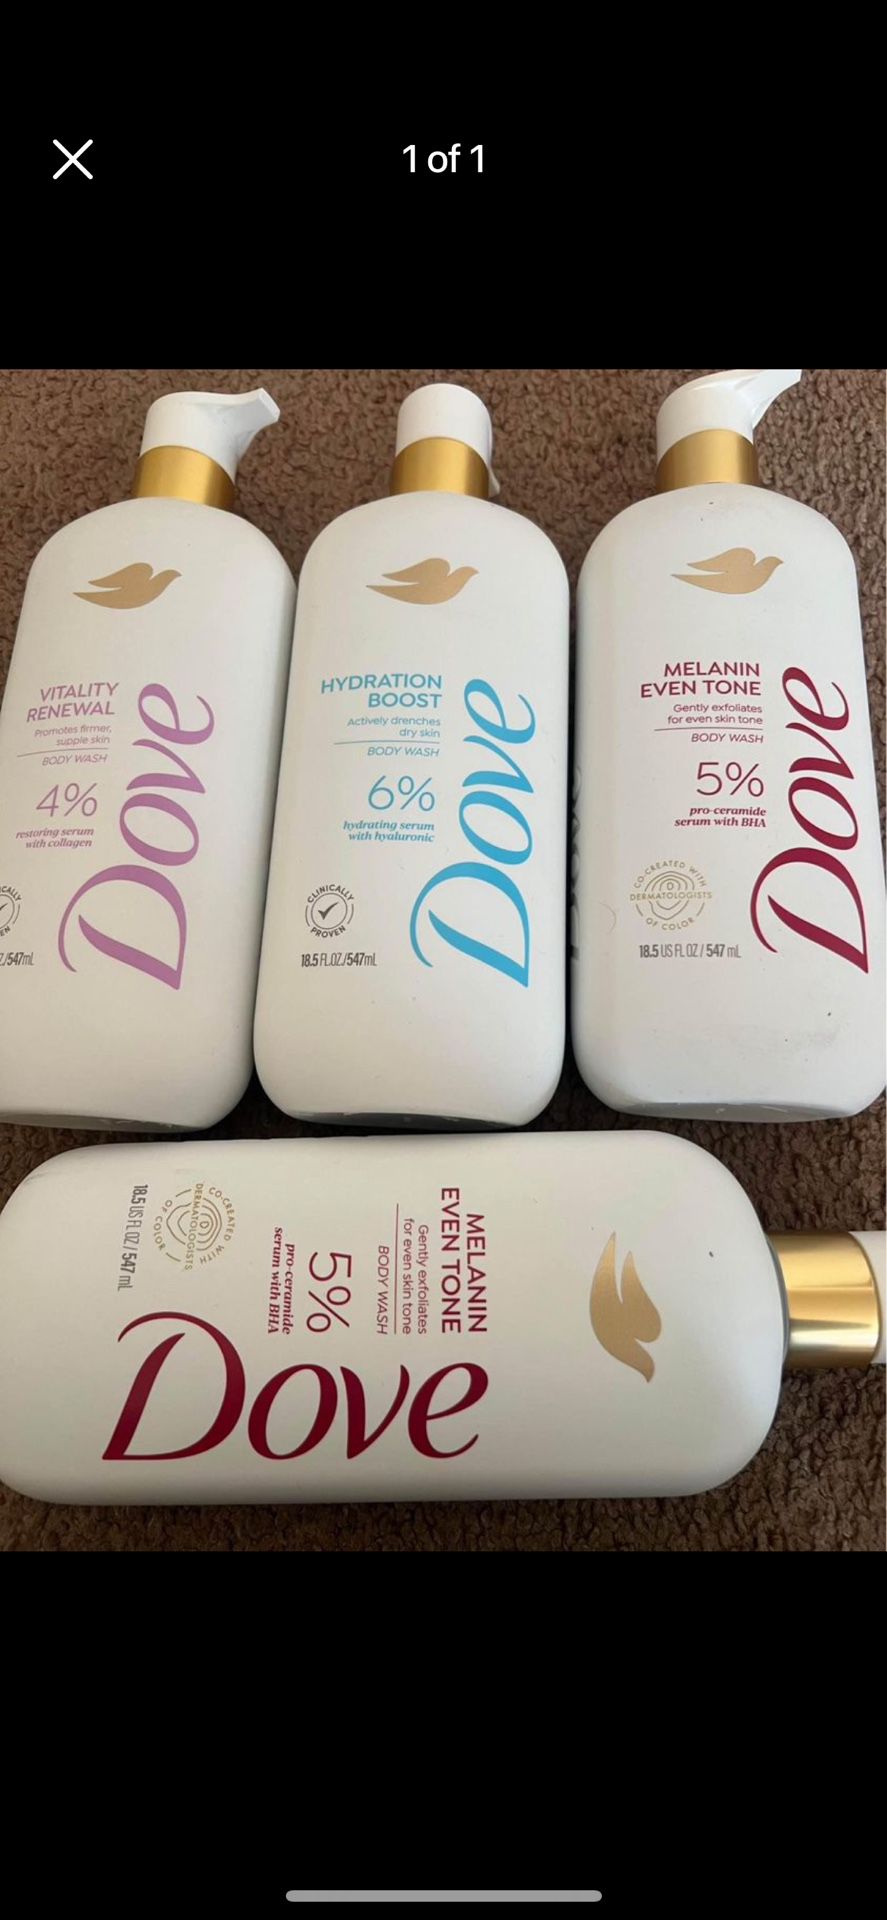 Dove Hydration, Boost $6 Each